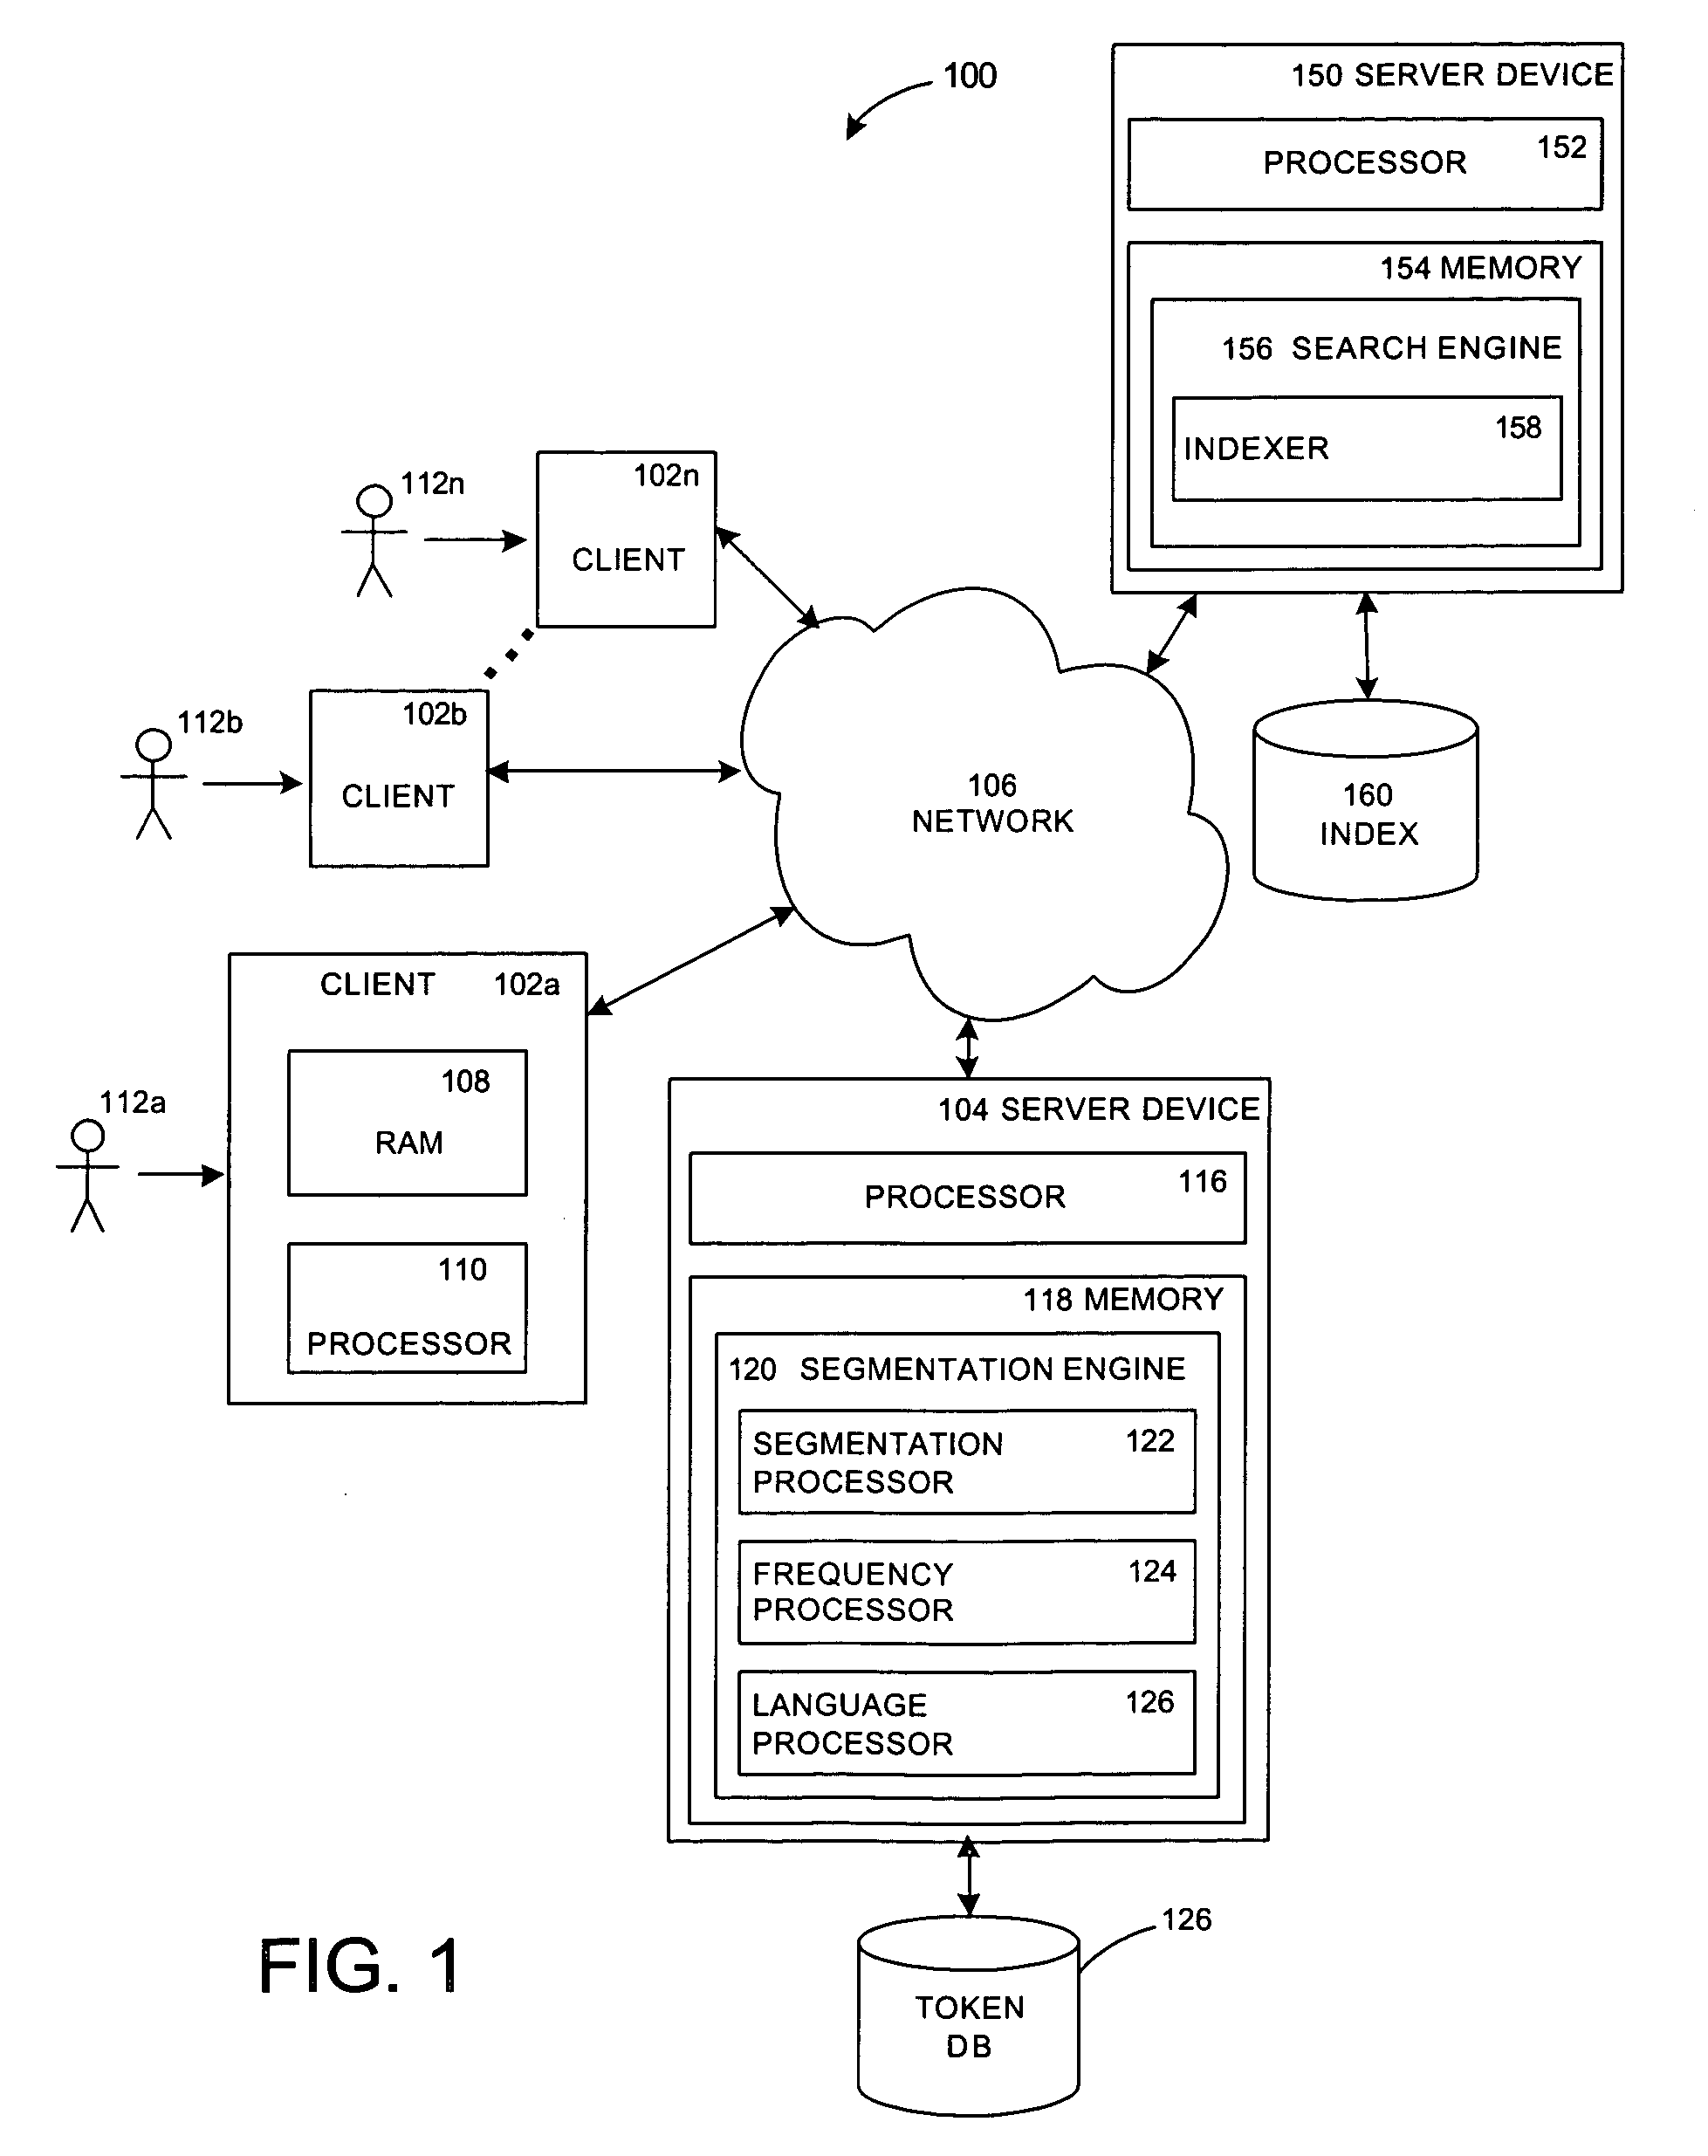 Methods and systems for selecting a language for text segmentation